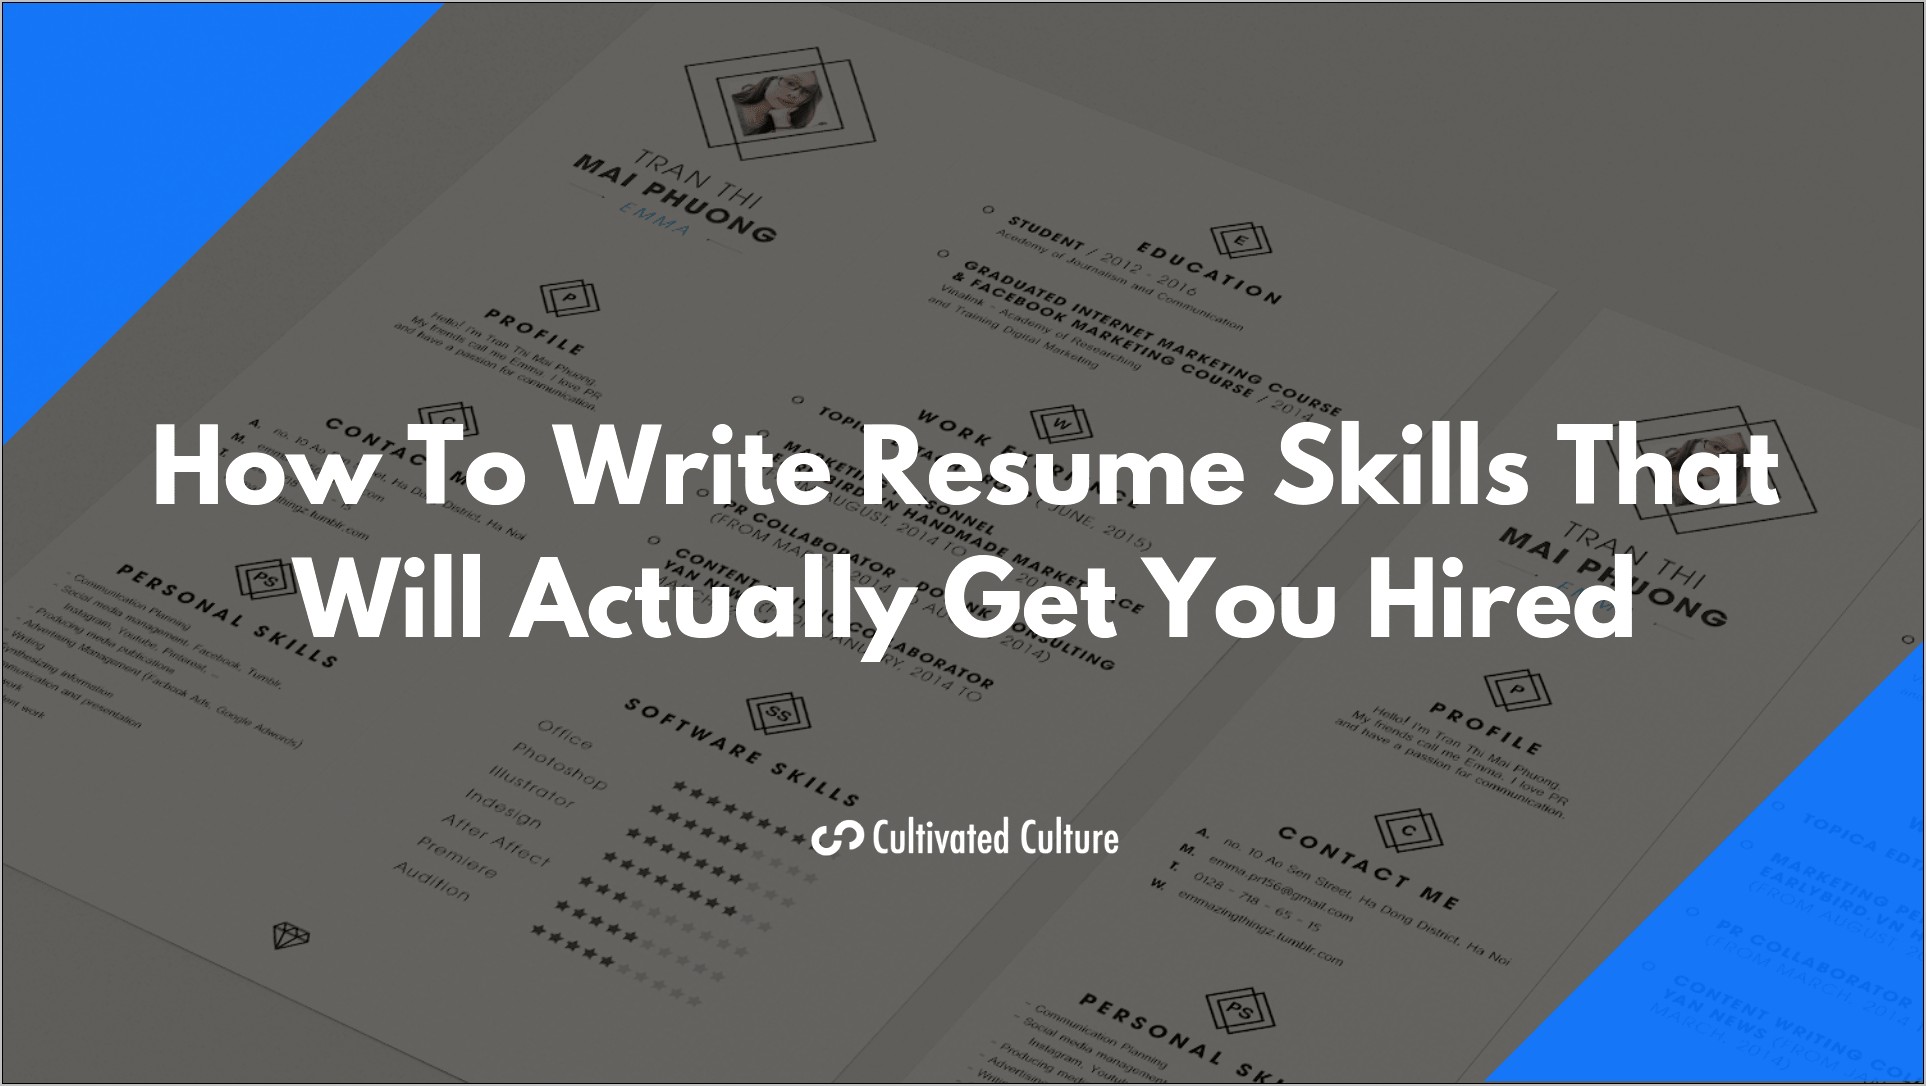 Resume Tips 2019 Strengths And Skills